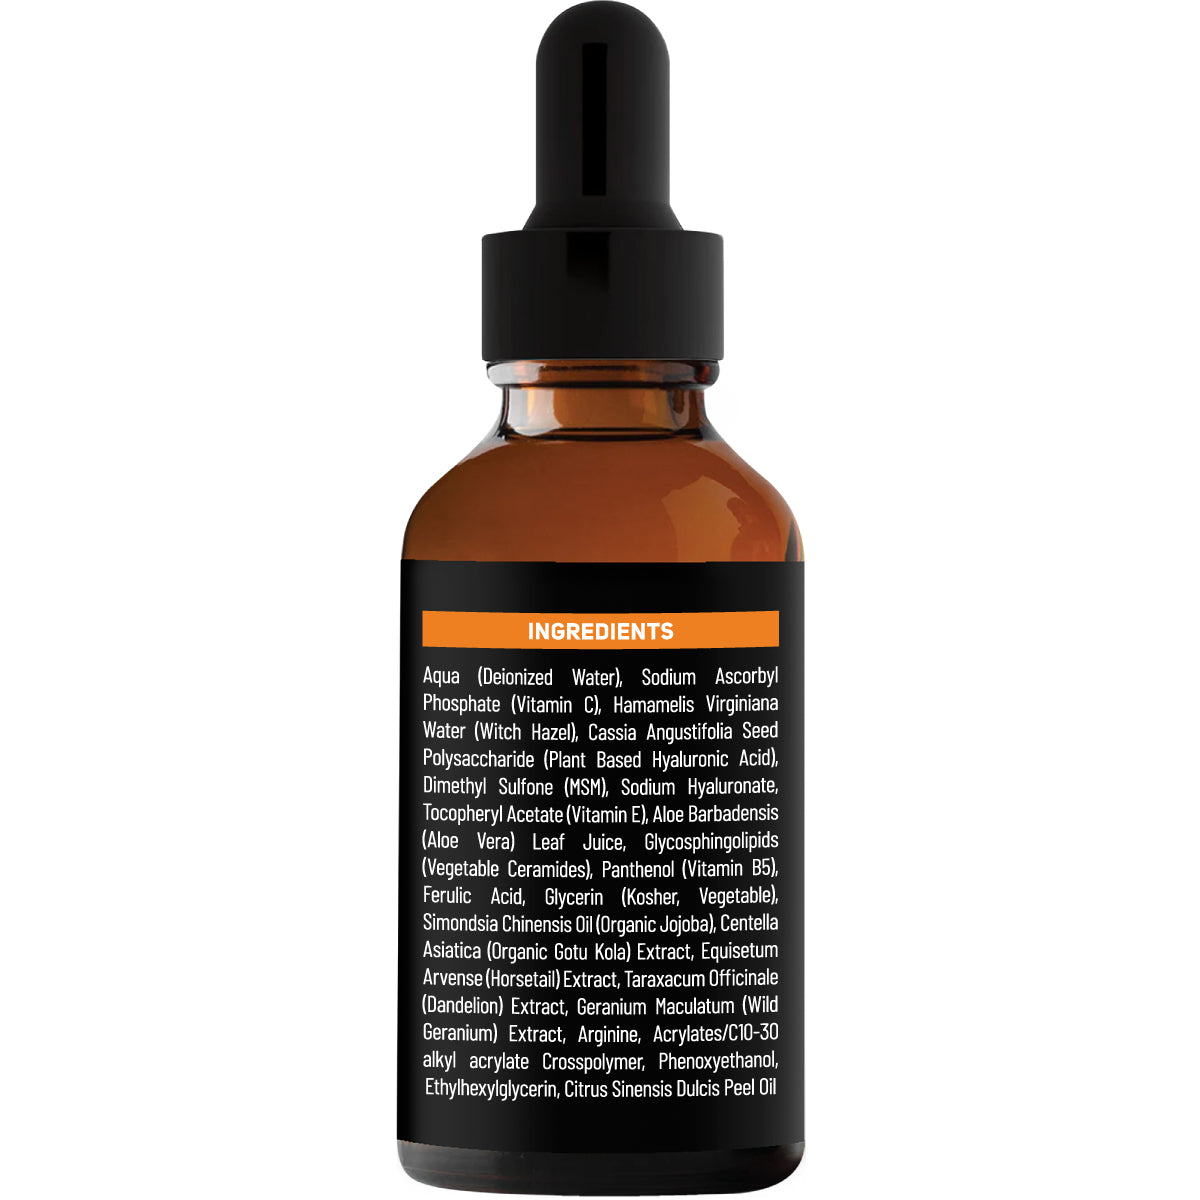 Vitamin C Serum for Face with Hyaluronic Acid 1 oz